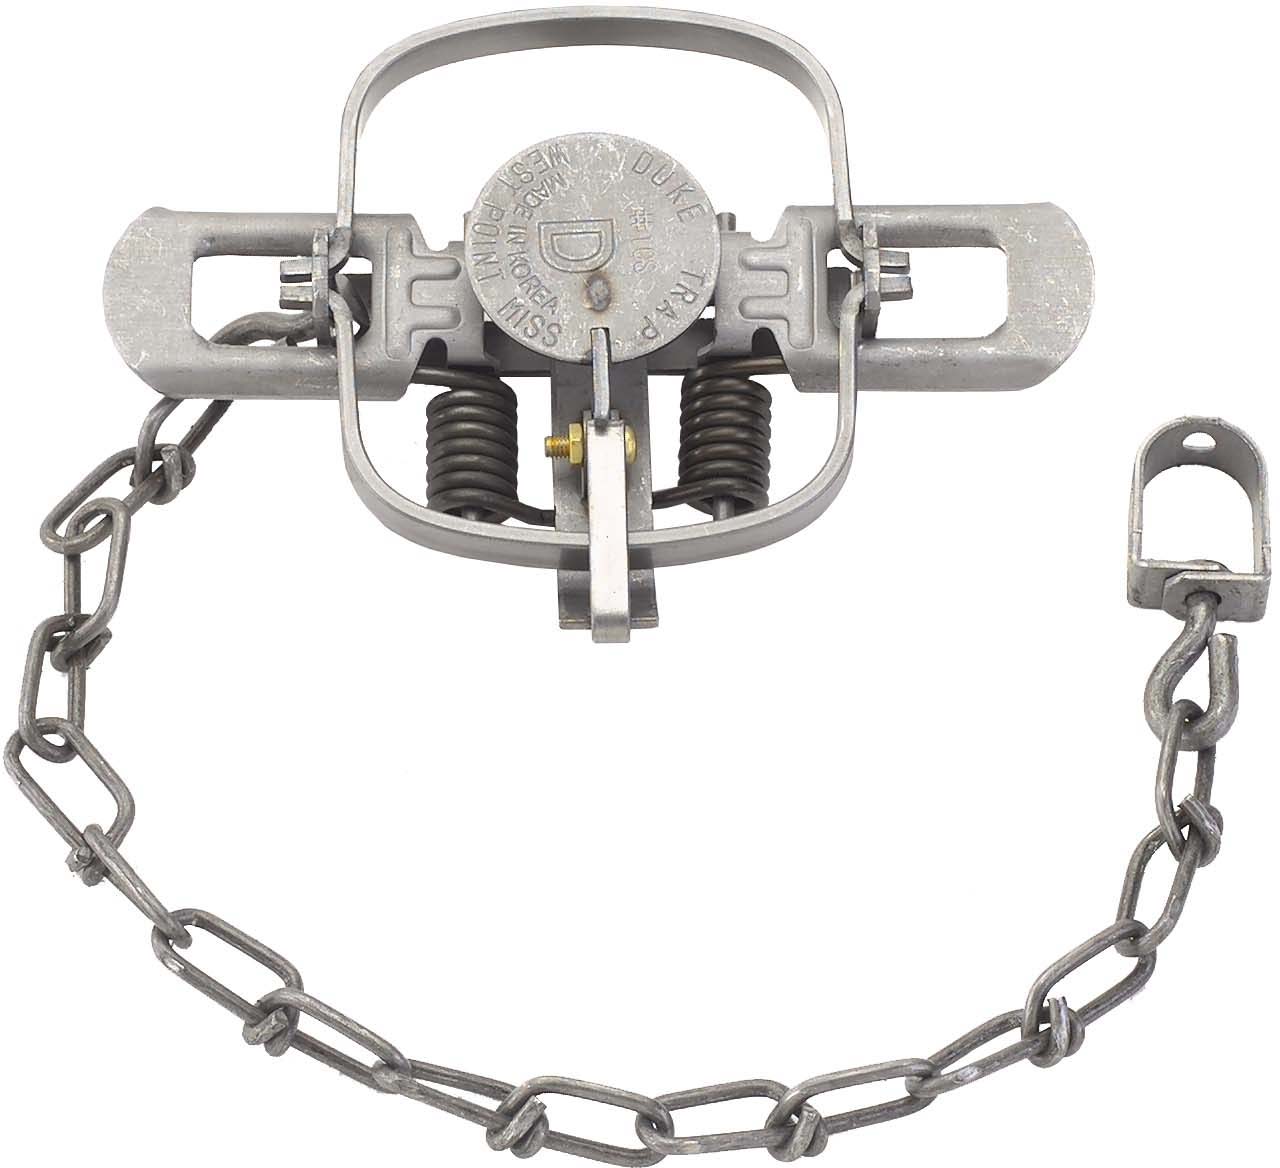 Duke 0473 Rubber Jaw COILSPRING Trap Free2dayship Taxfree for sale online 